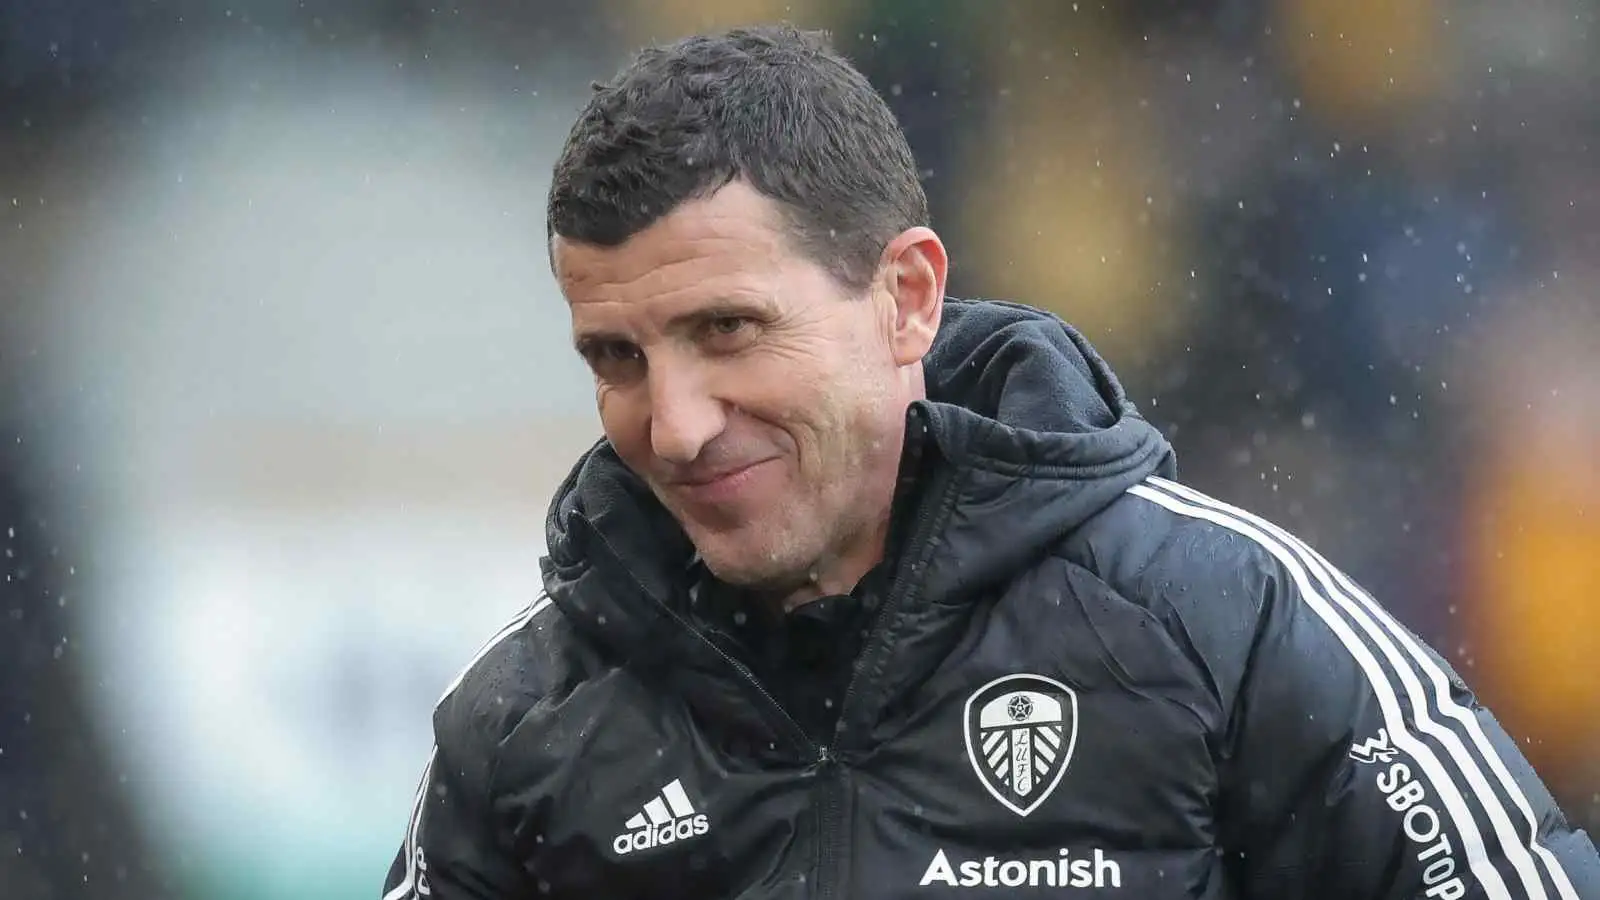 Leeds United injury news: Javi Gracia issues Willy Gnonto update while worrying another star may be out for season